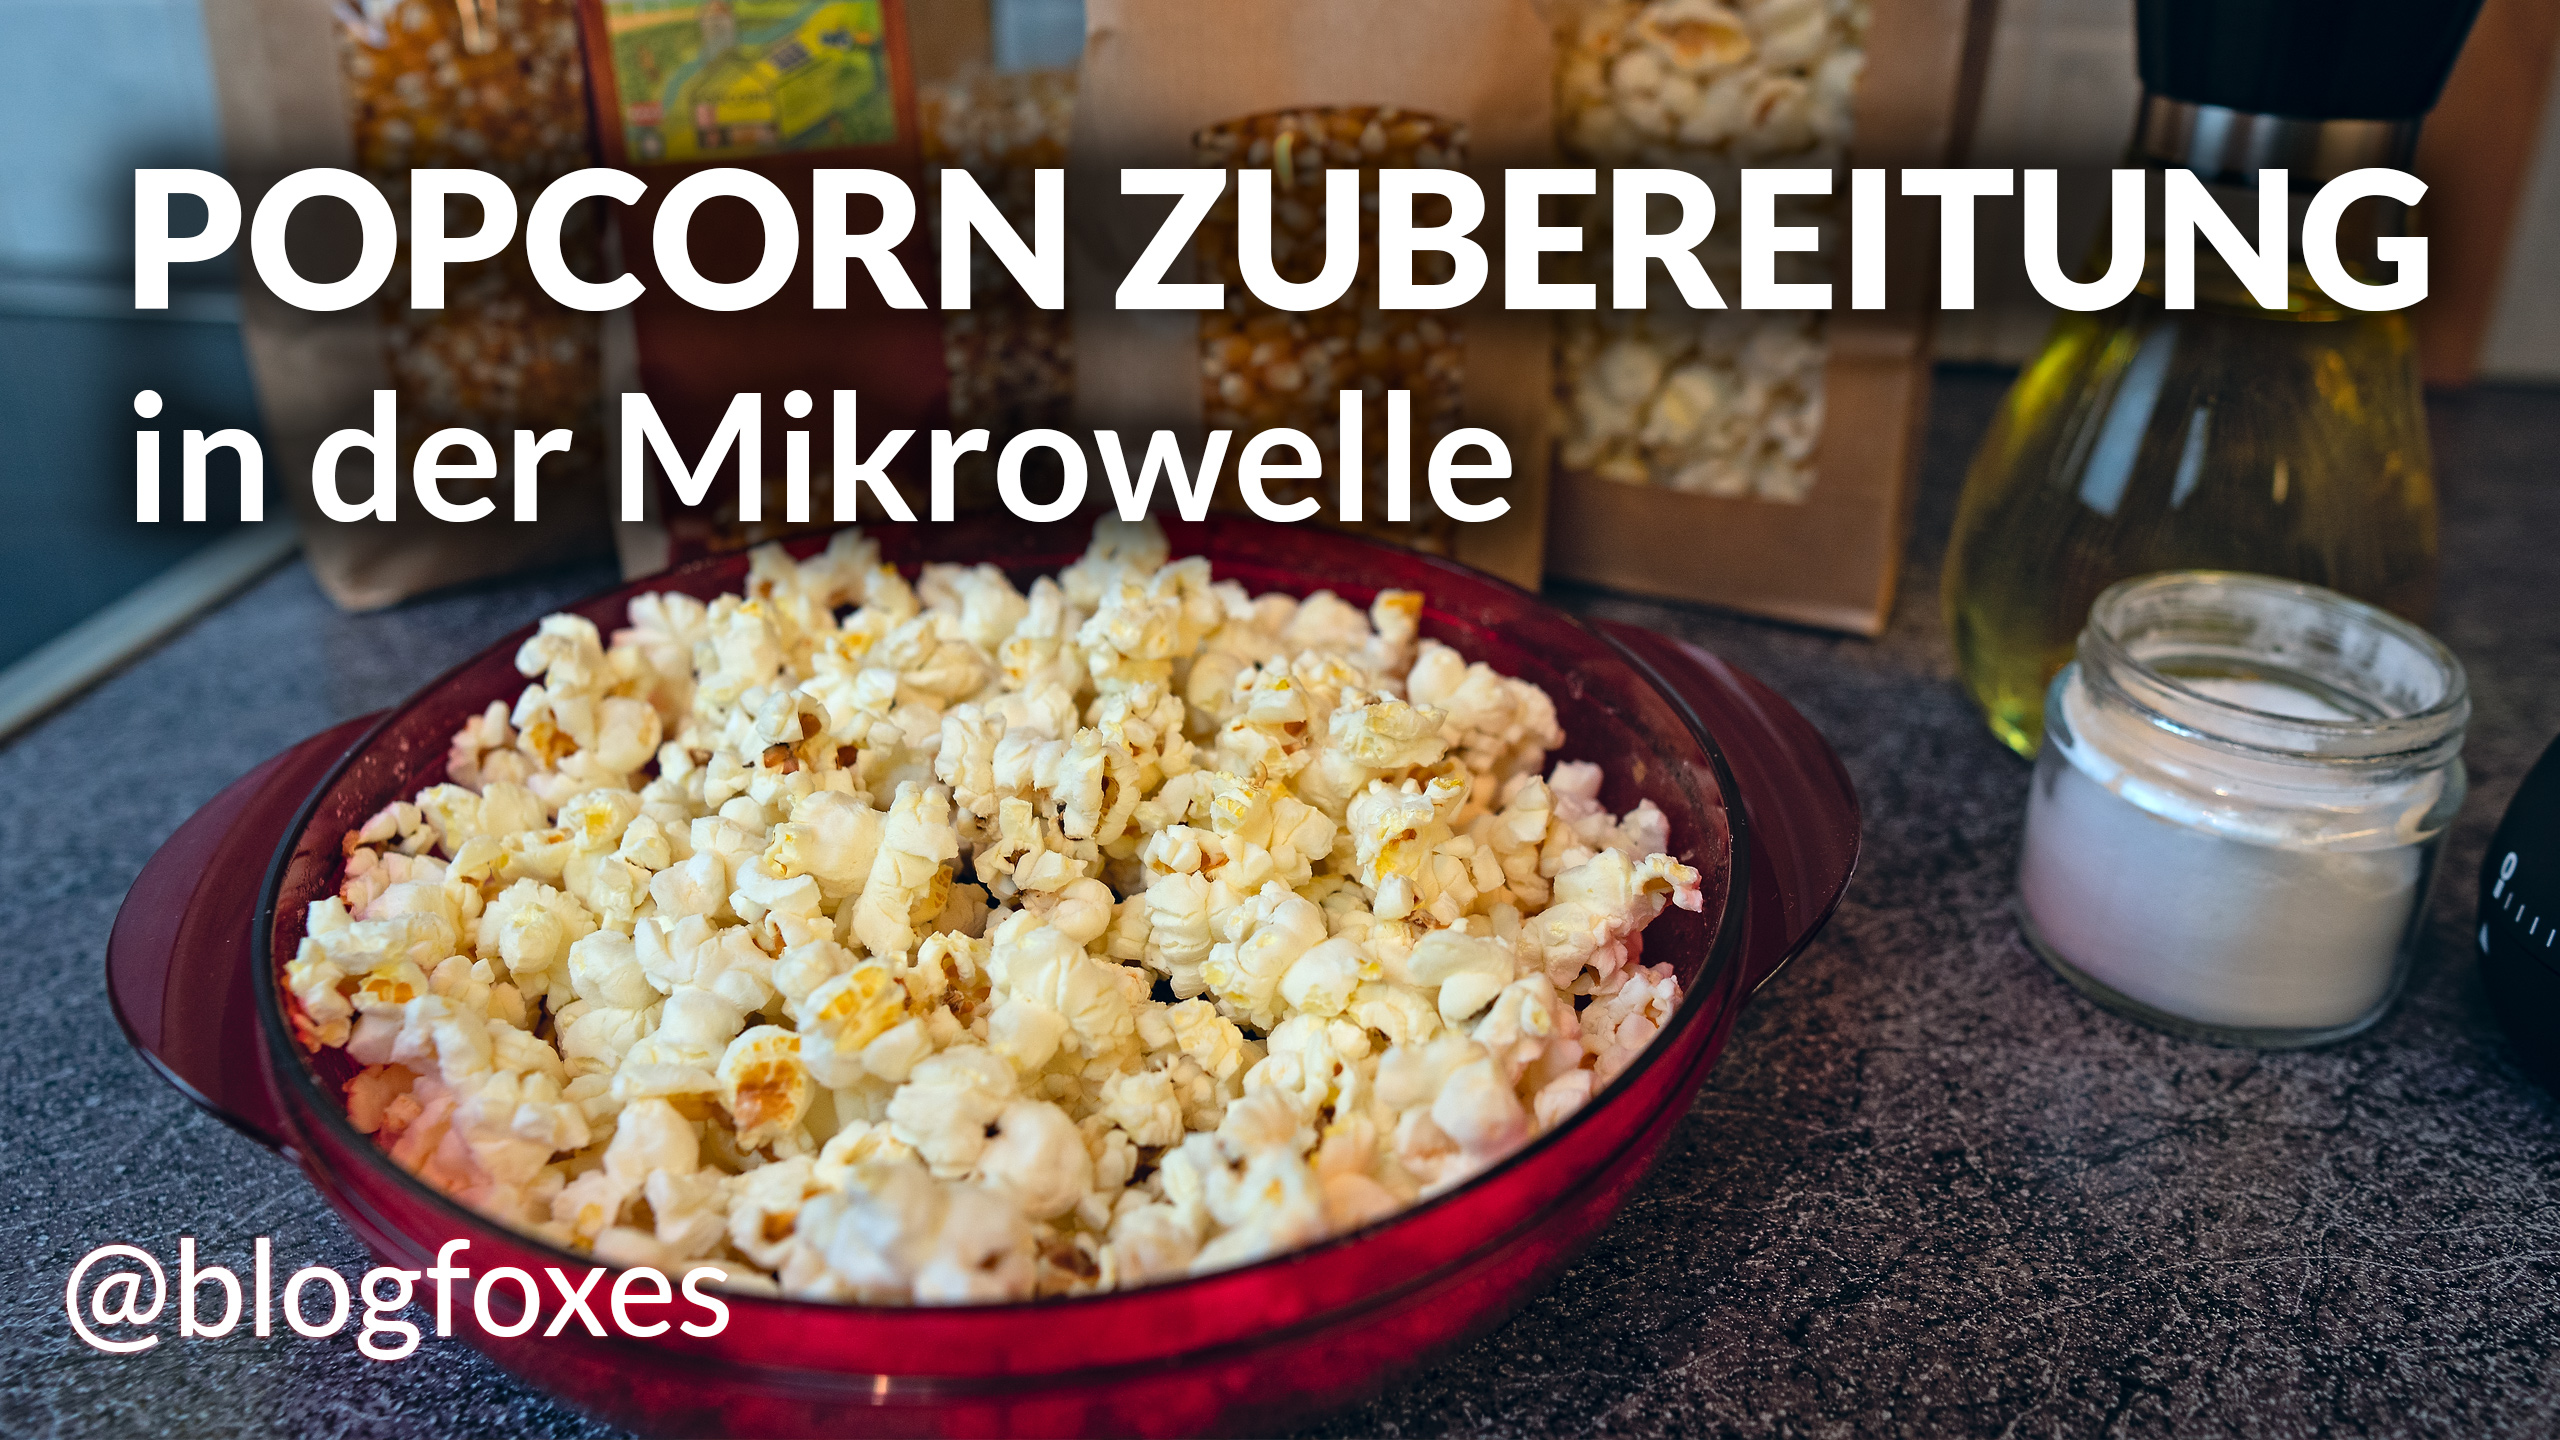 You are currently viewing Popcorn Zubereitung in der Mikrowelle